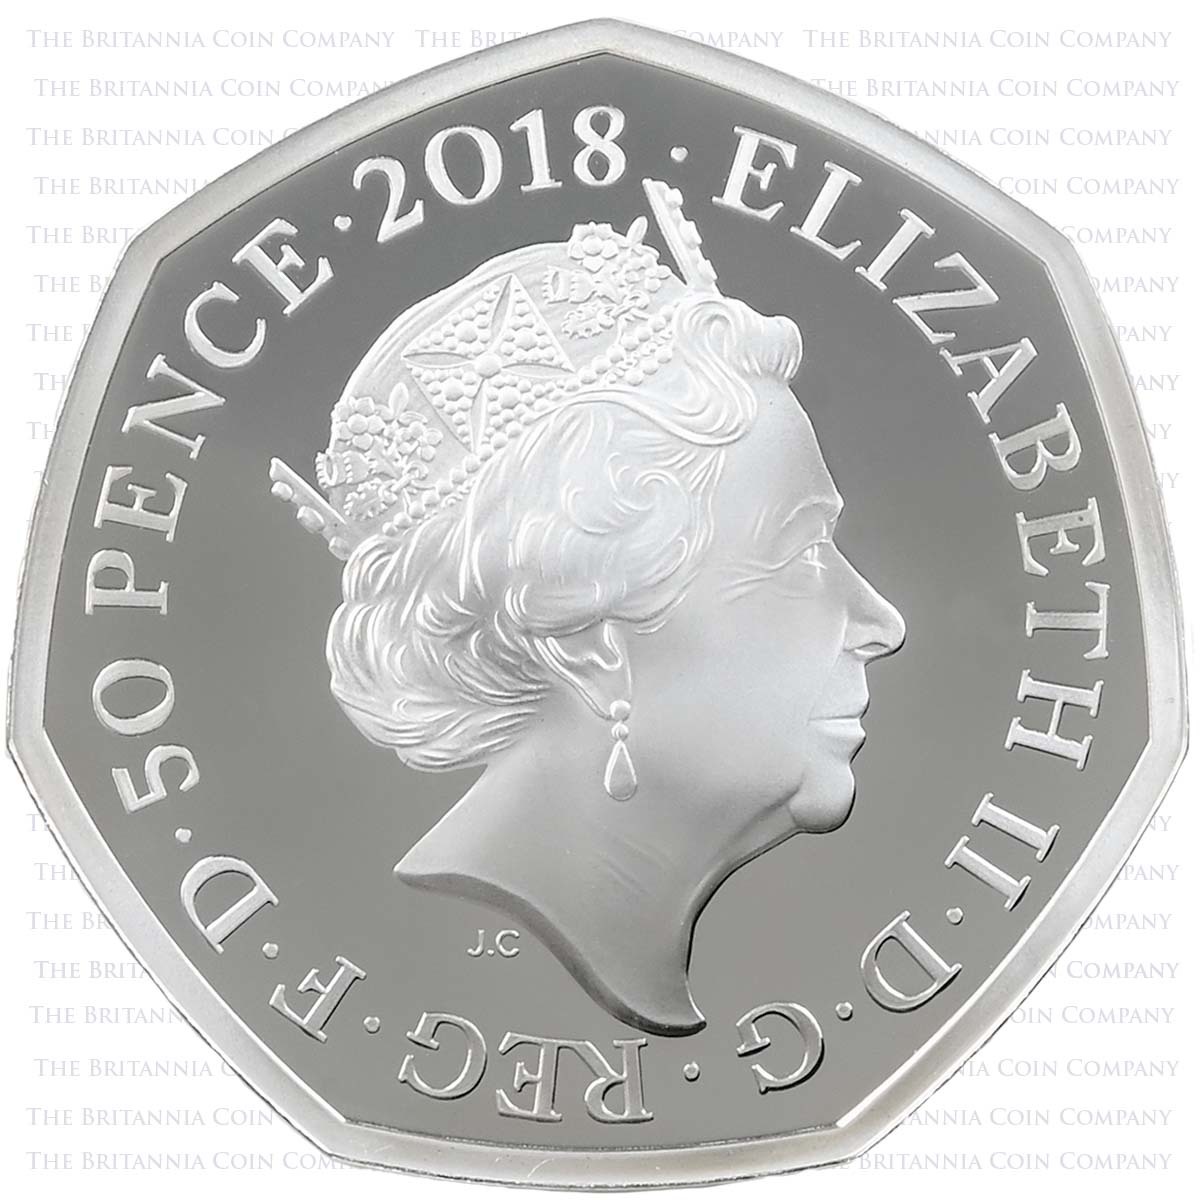 UK18TGSP 2018 Beatrix Potter The Tailor of Gloucester Fifty Pence Colour Printed Silver Proof Coin Obverse